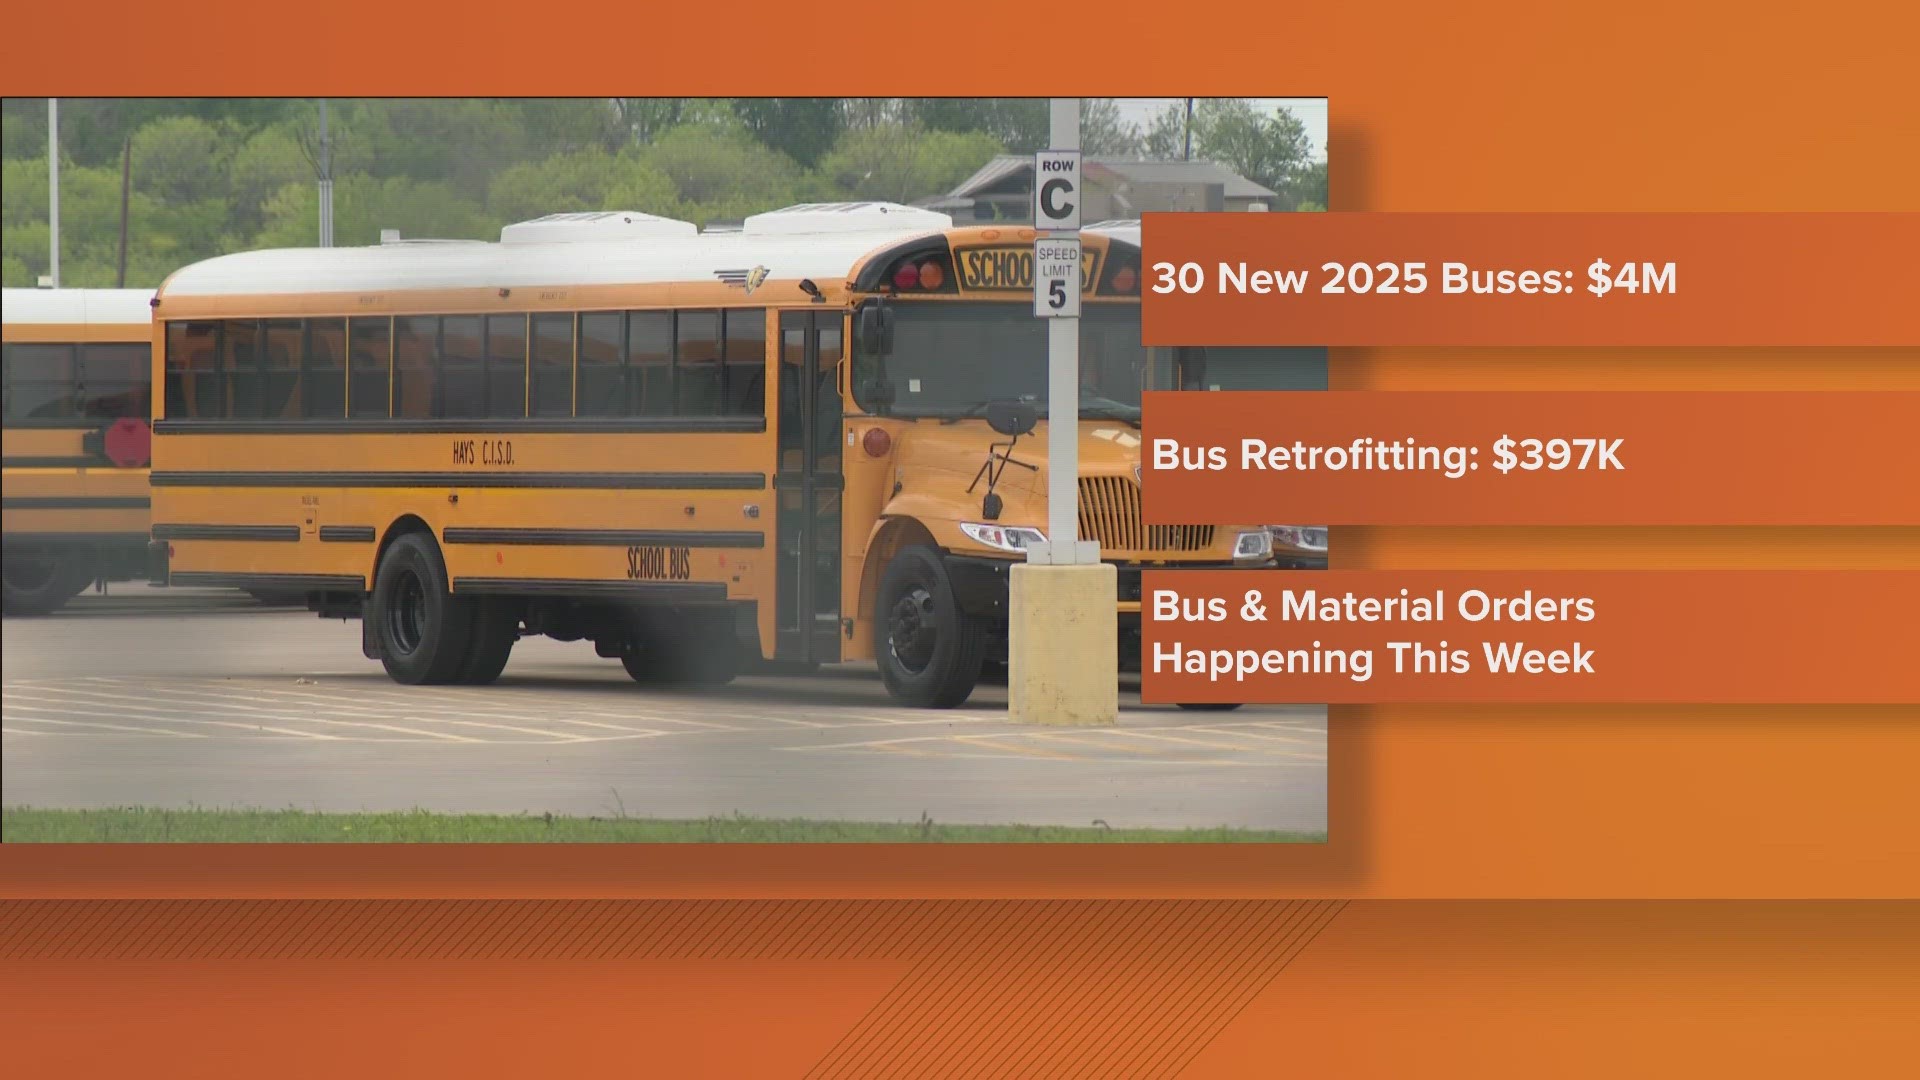 The board of trustees plans to add 30 new buses within the next year.